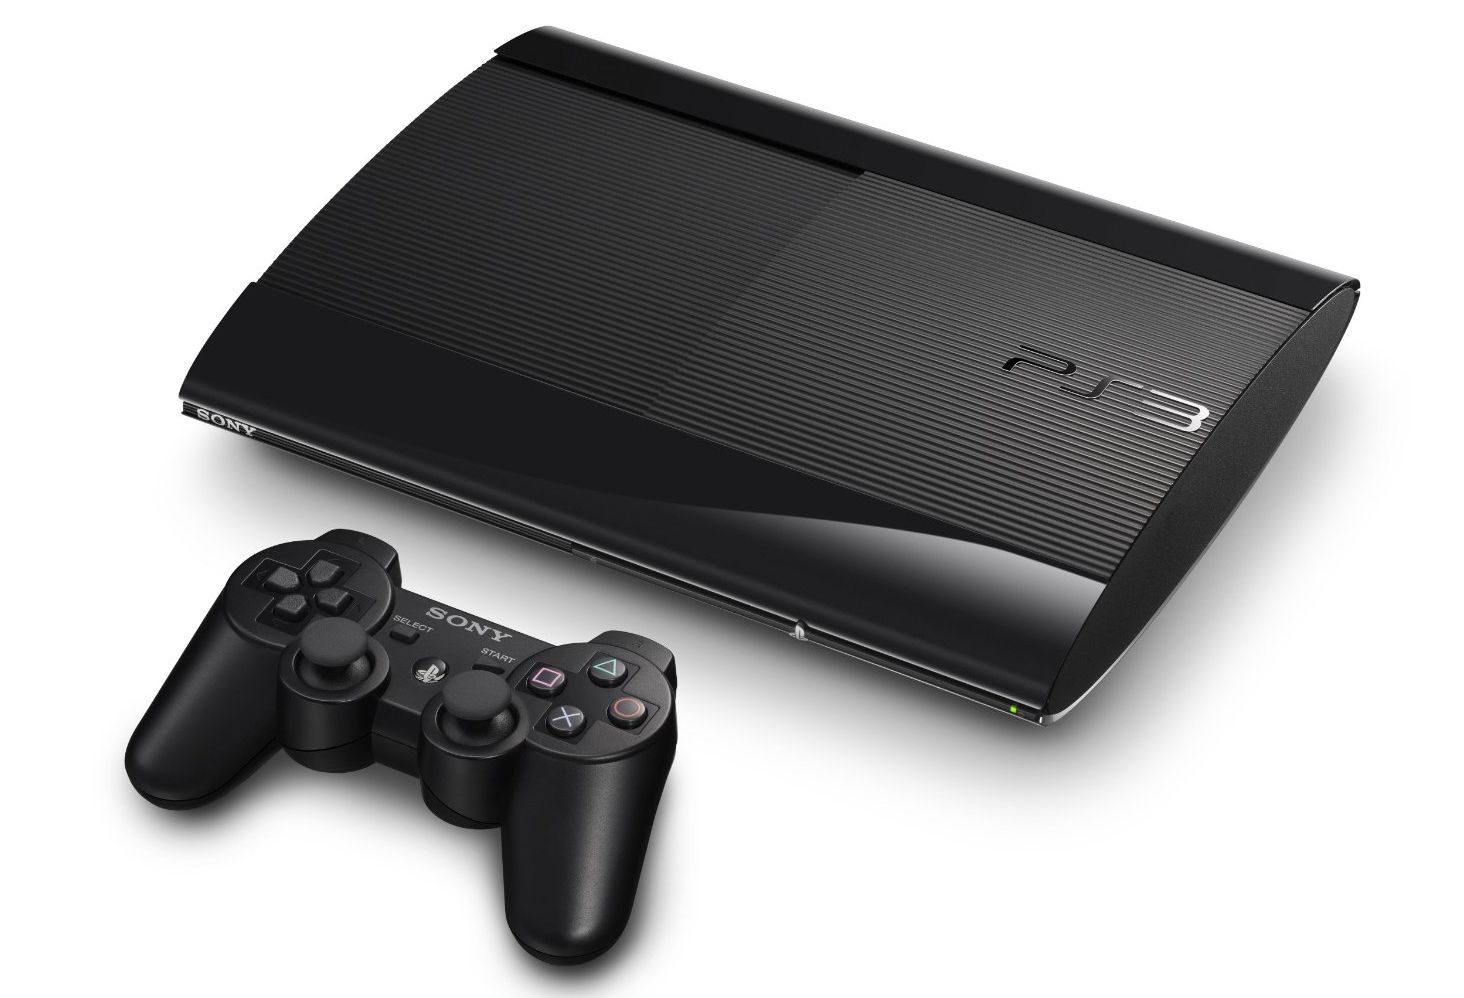 sony ps3 super slim 12gb price dropped to 199 199 image 1